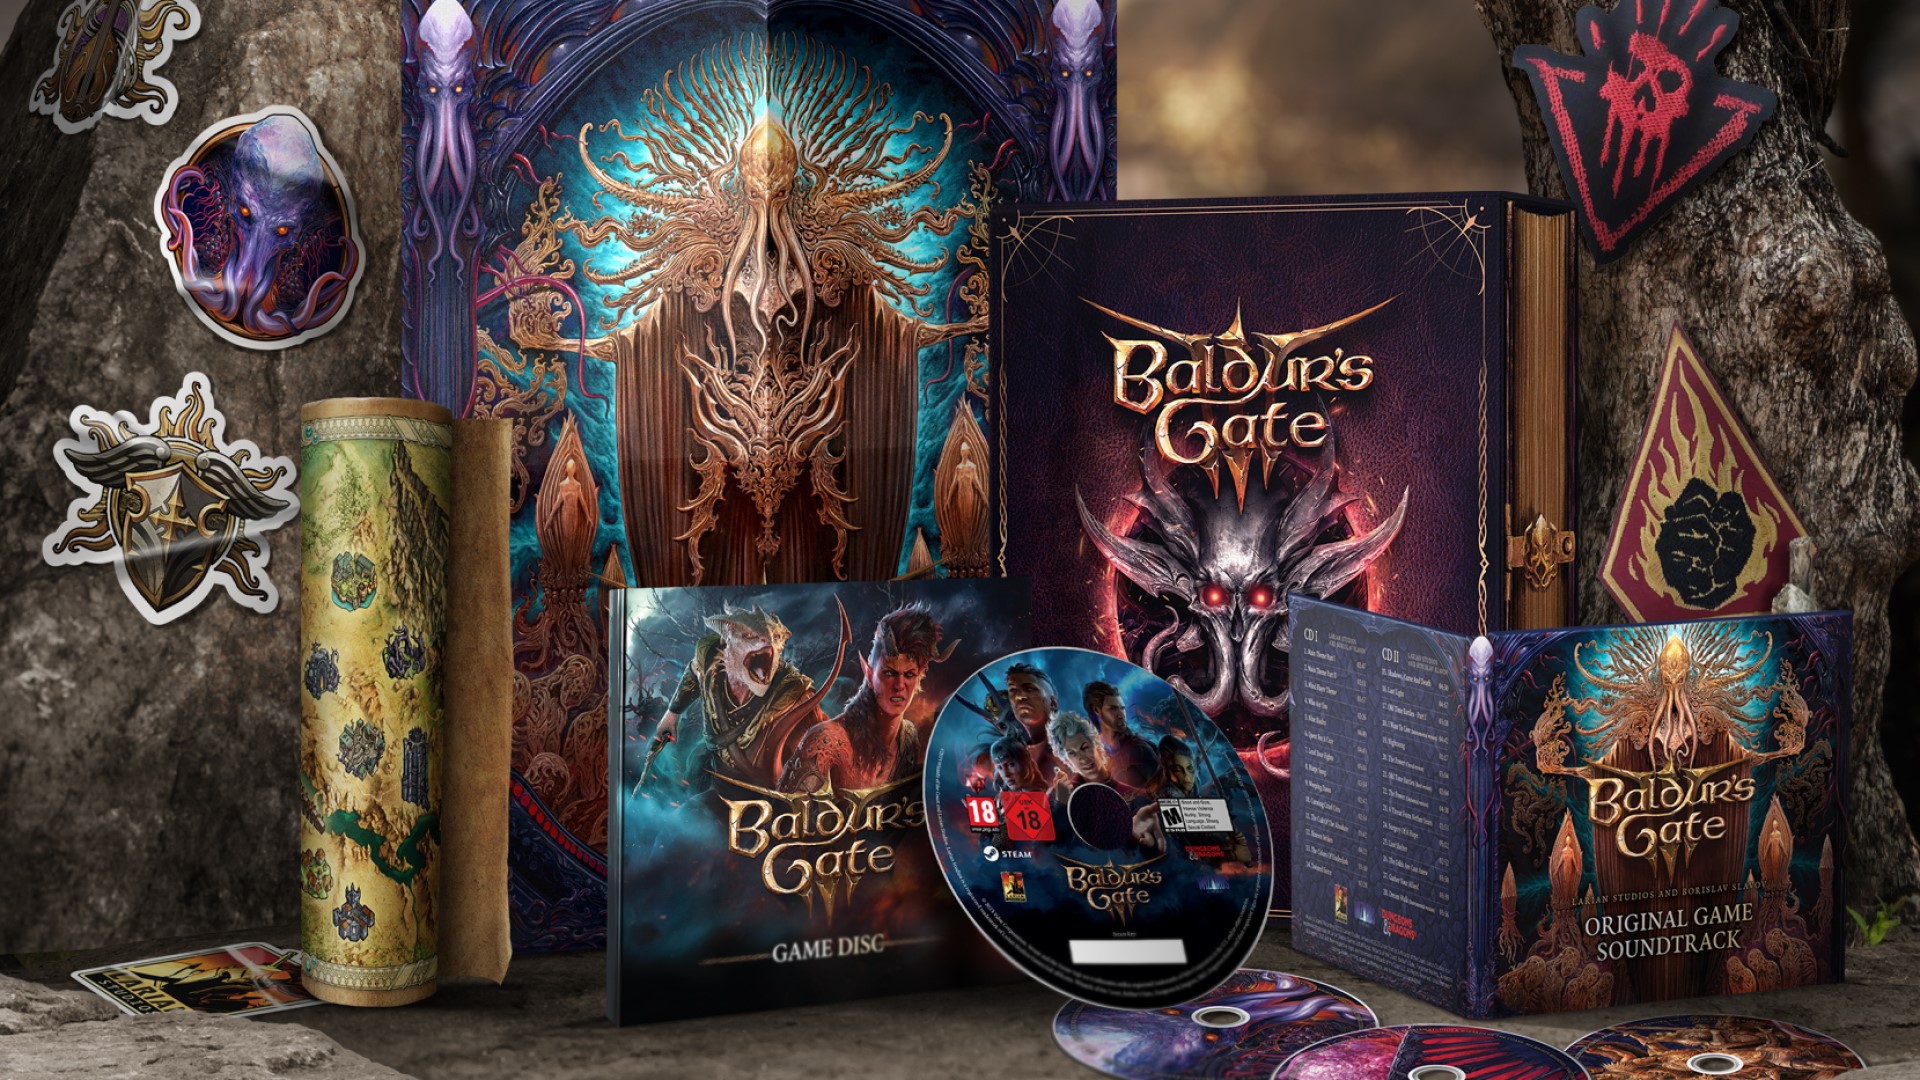 Baldur's Gate 3 Gets a Physical Deluxe Edition for PC, Consoles